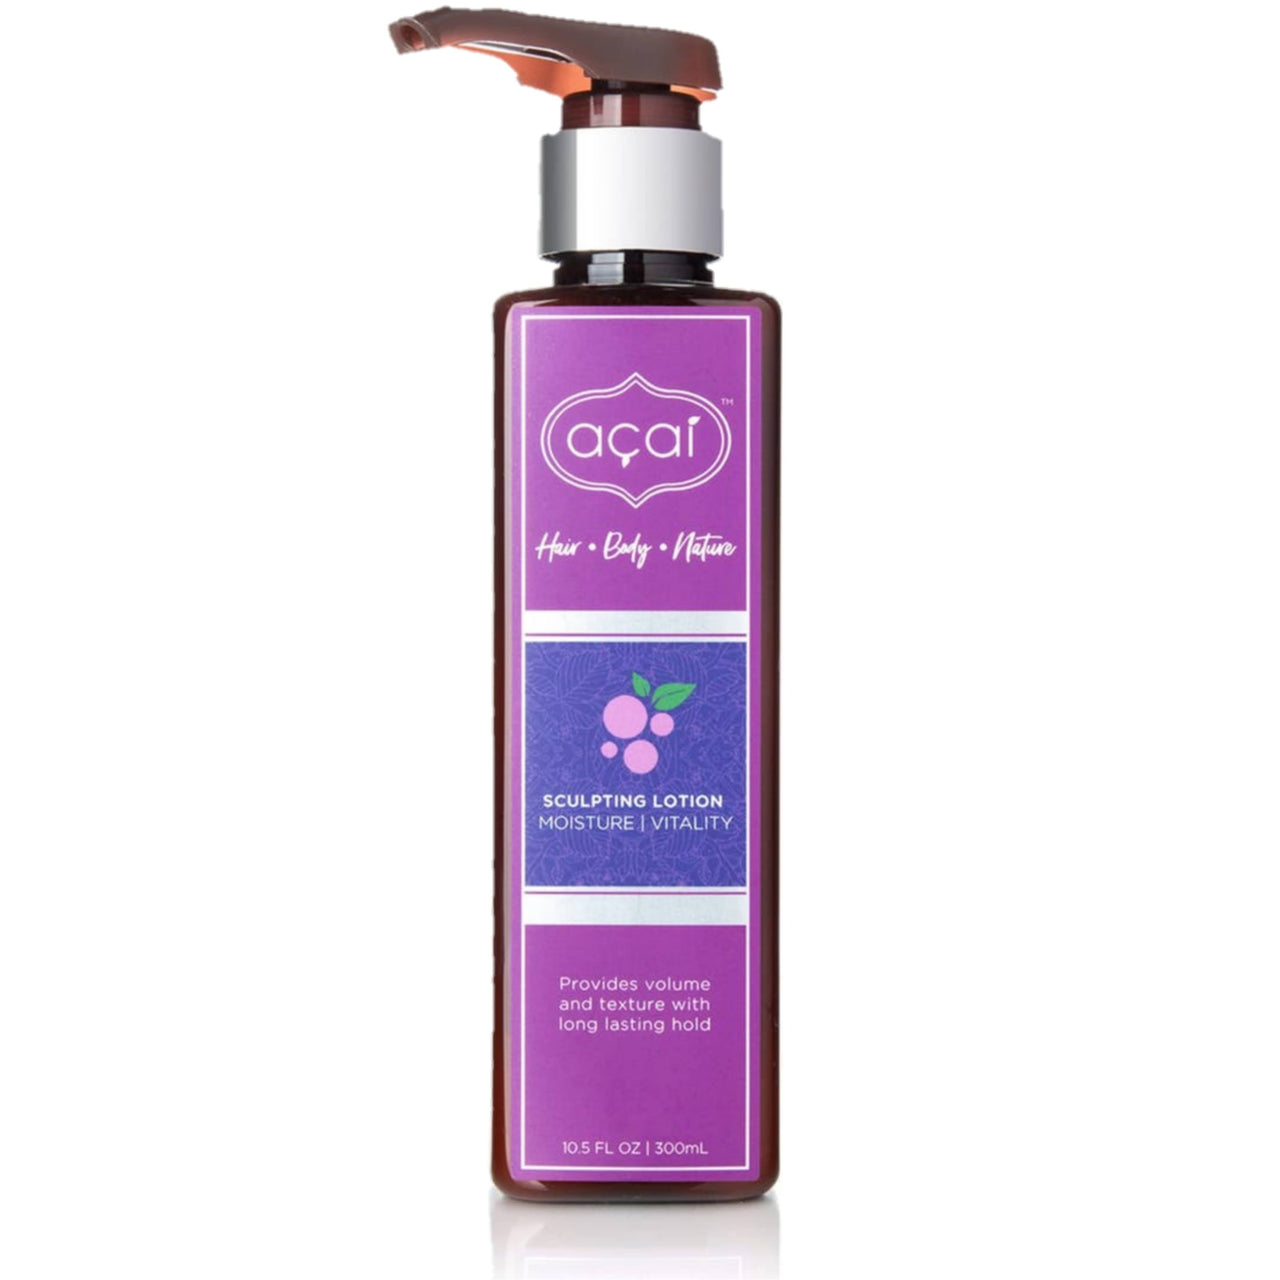 Acai Hair Sculpting Lotion Provides Volume & Texture With Long Lasting Hold